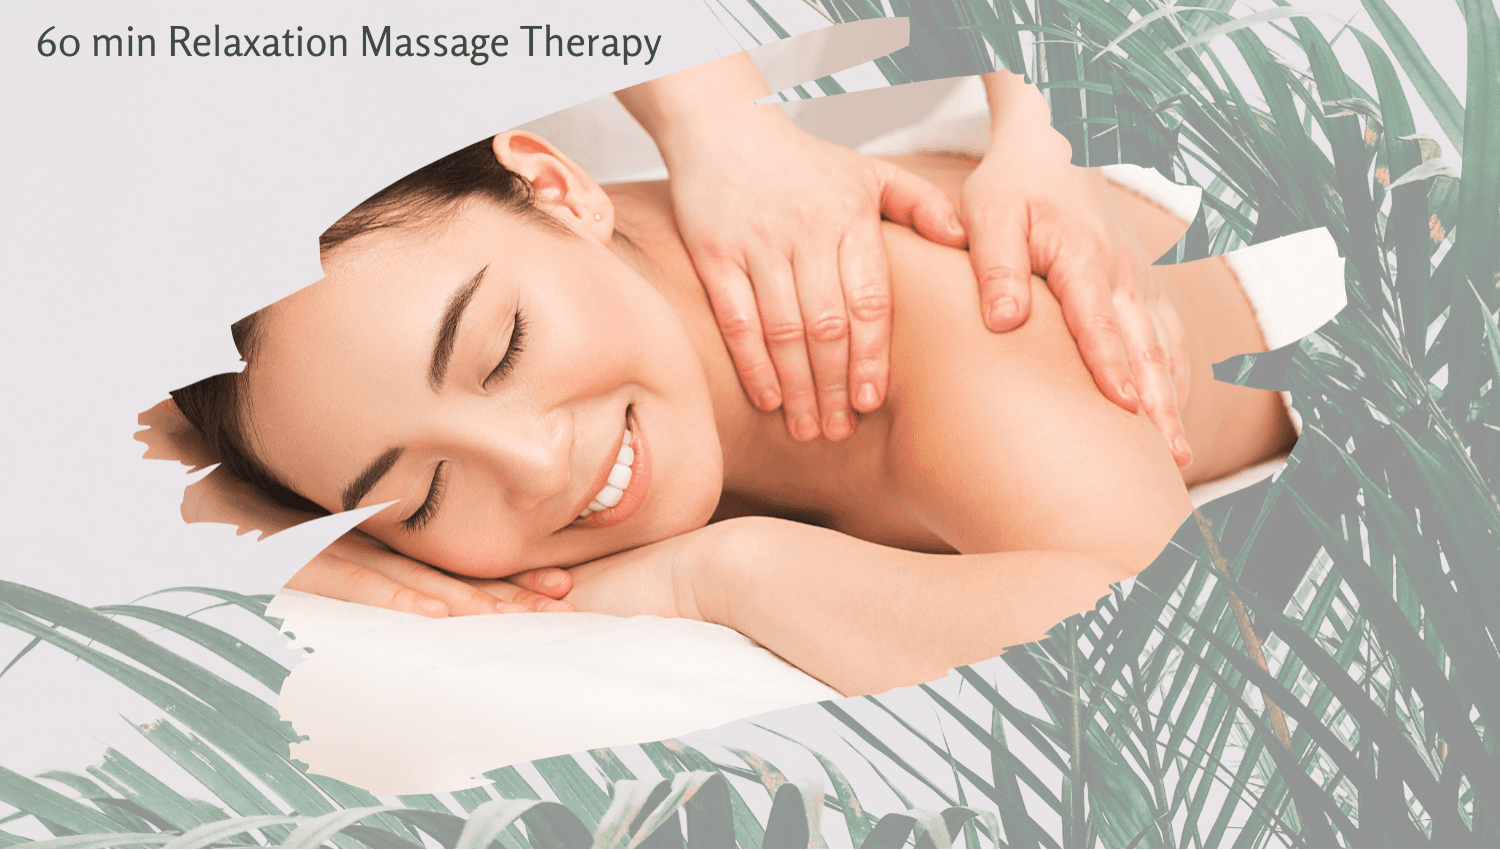 Image for Returning clients: Relaxation Massage Therapy